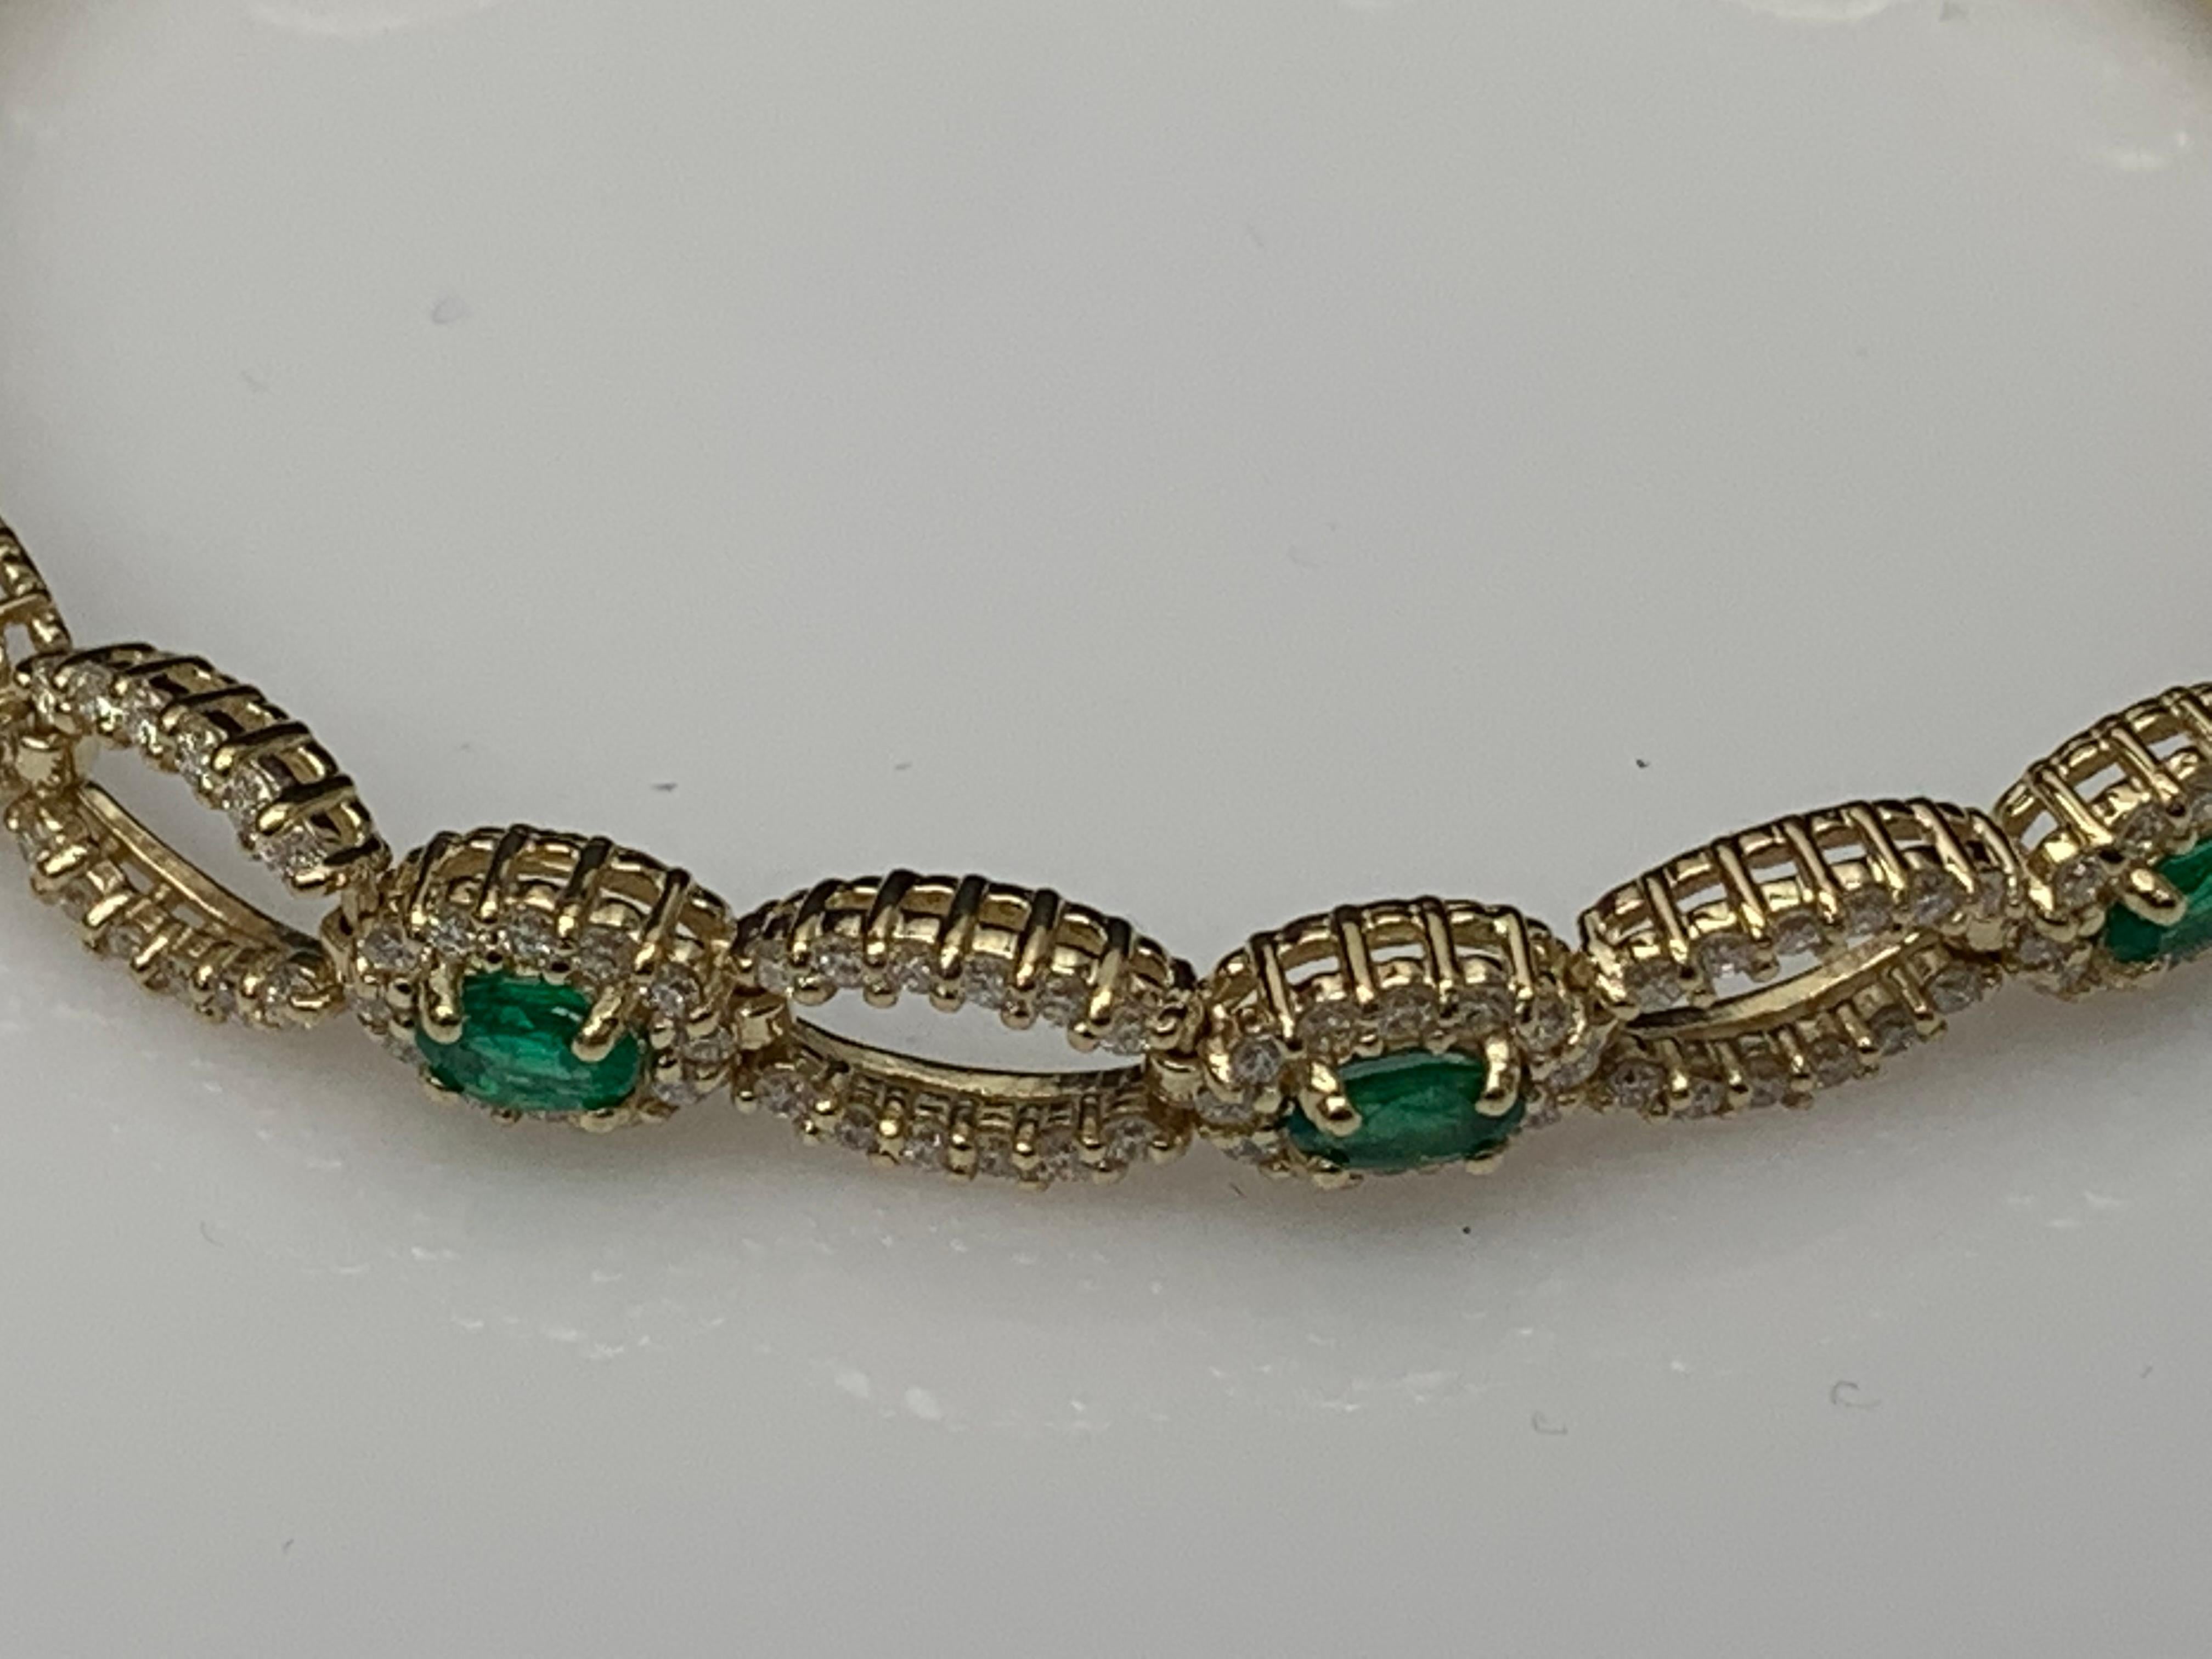 Brilliant Cut Open-Work 2.13 Carat Emerald and Diamond Bracelet in 14K Yellow Gold For Sale